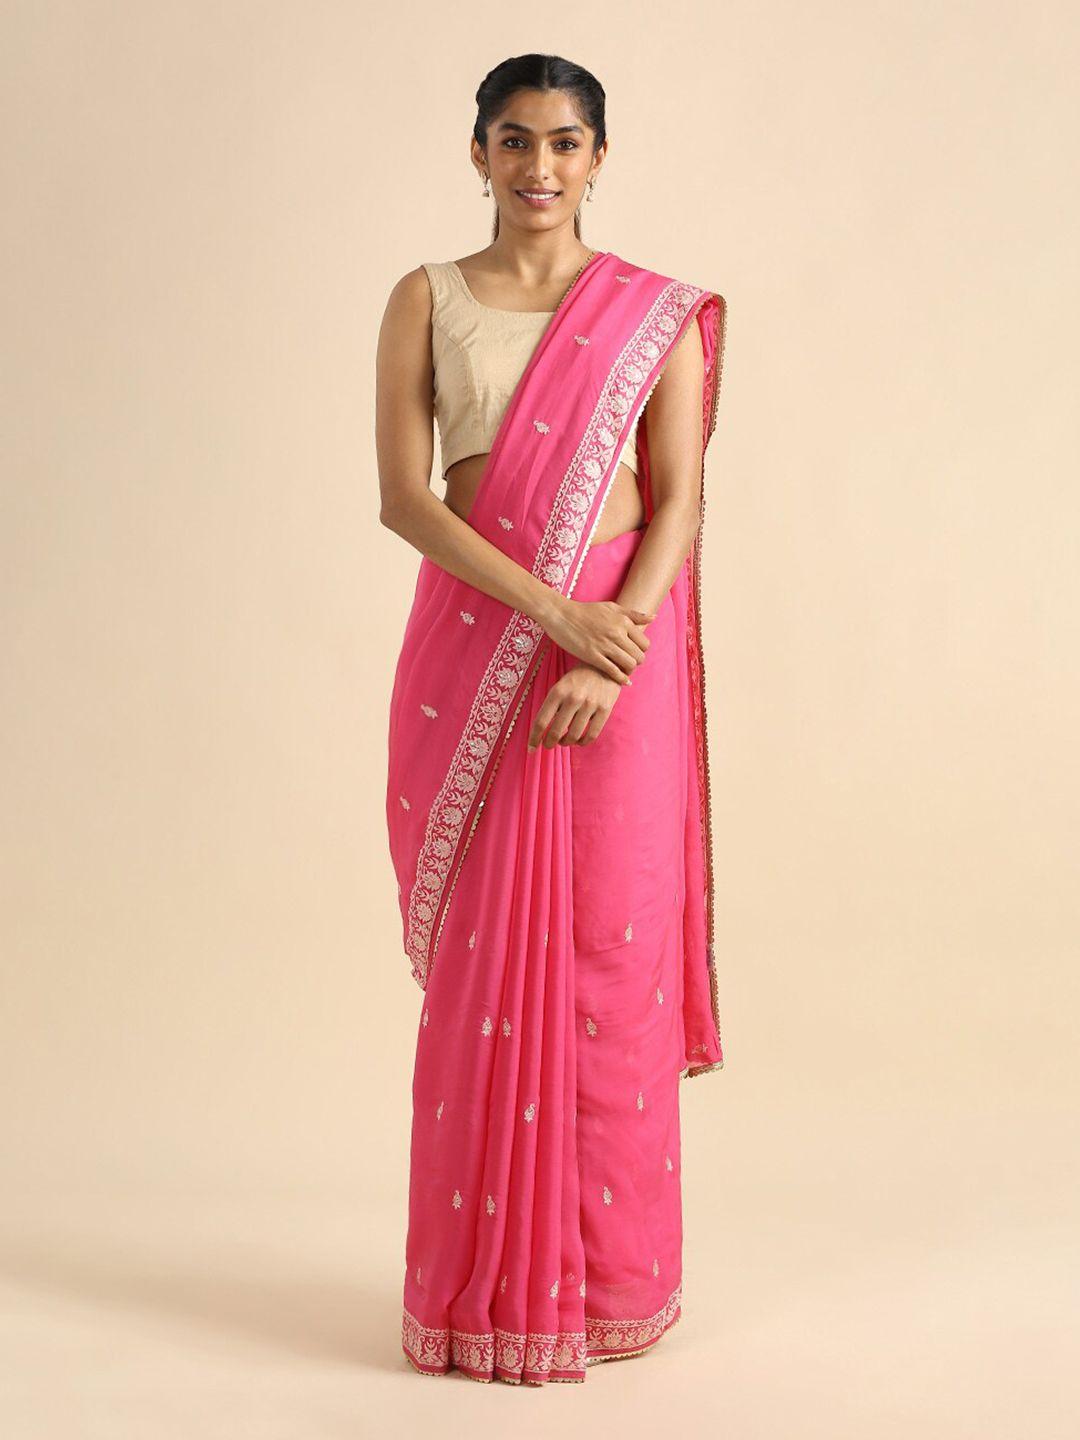 taneira dark pink & white floral embroidered saree